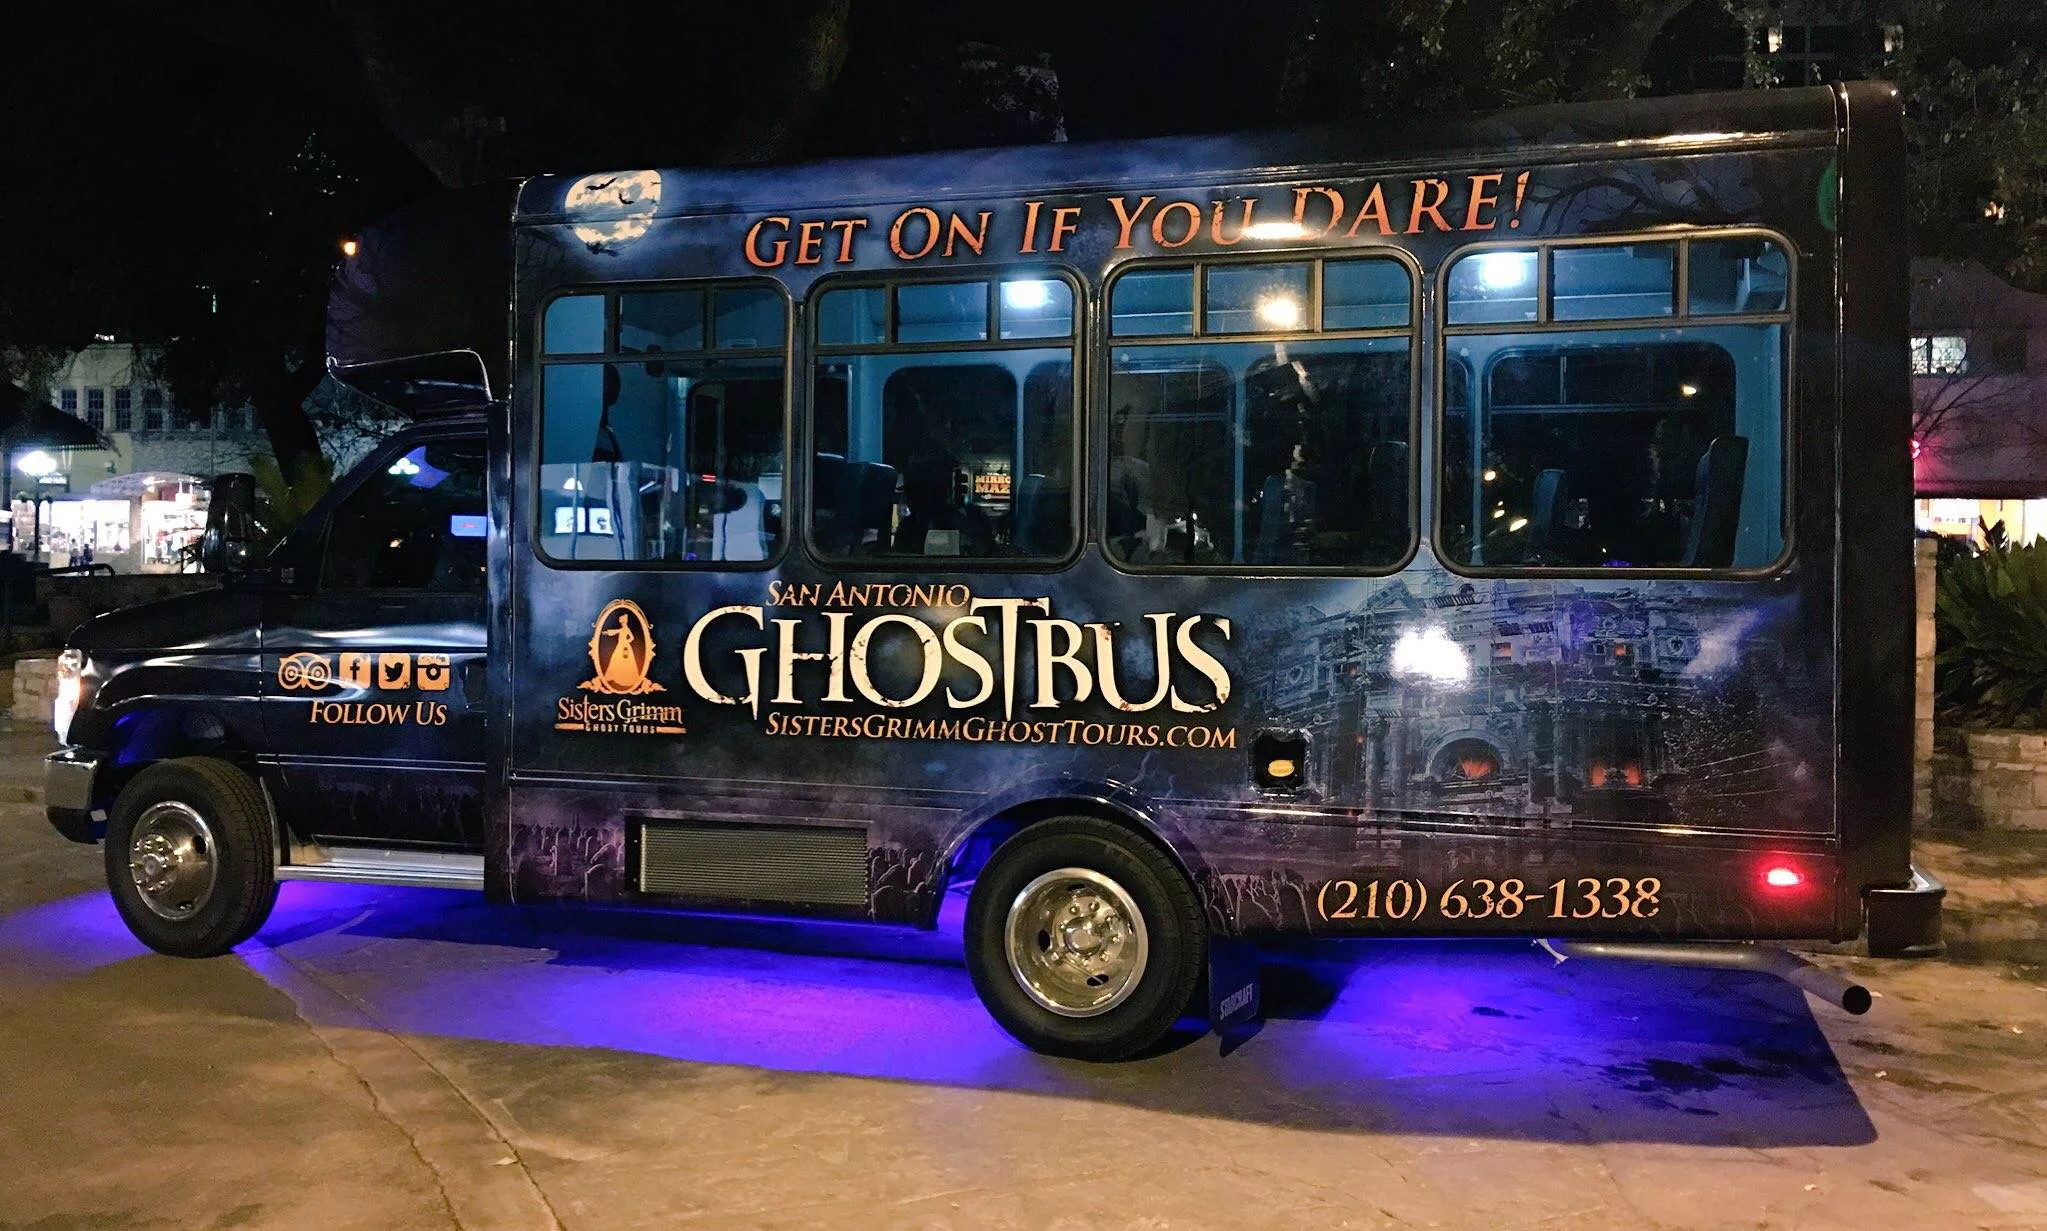 sisters grimm ghost bus tour